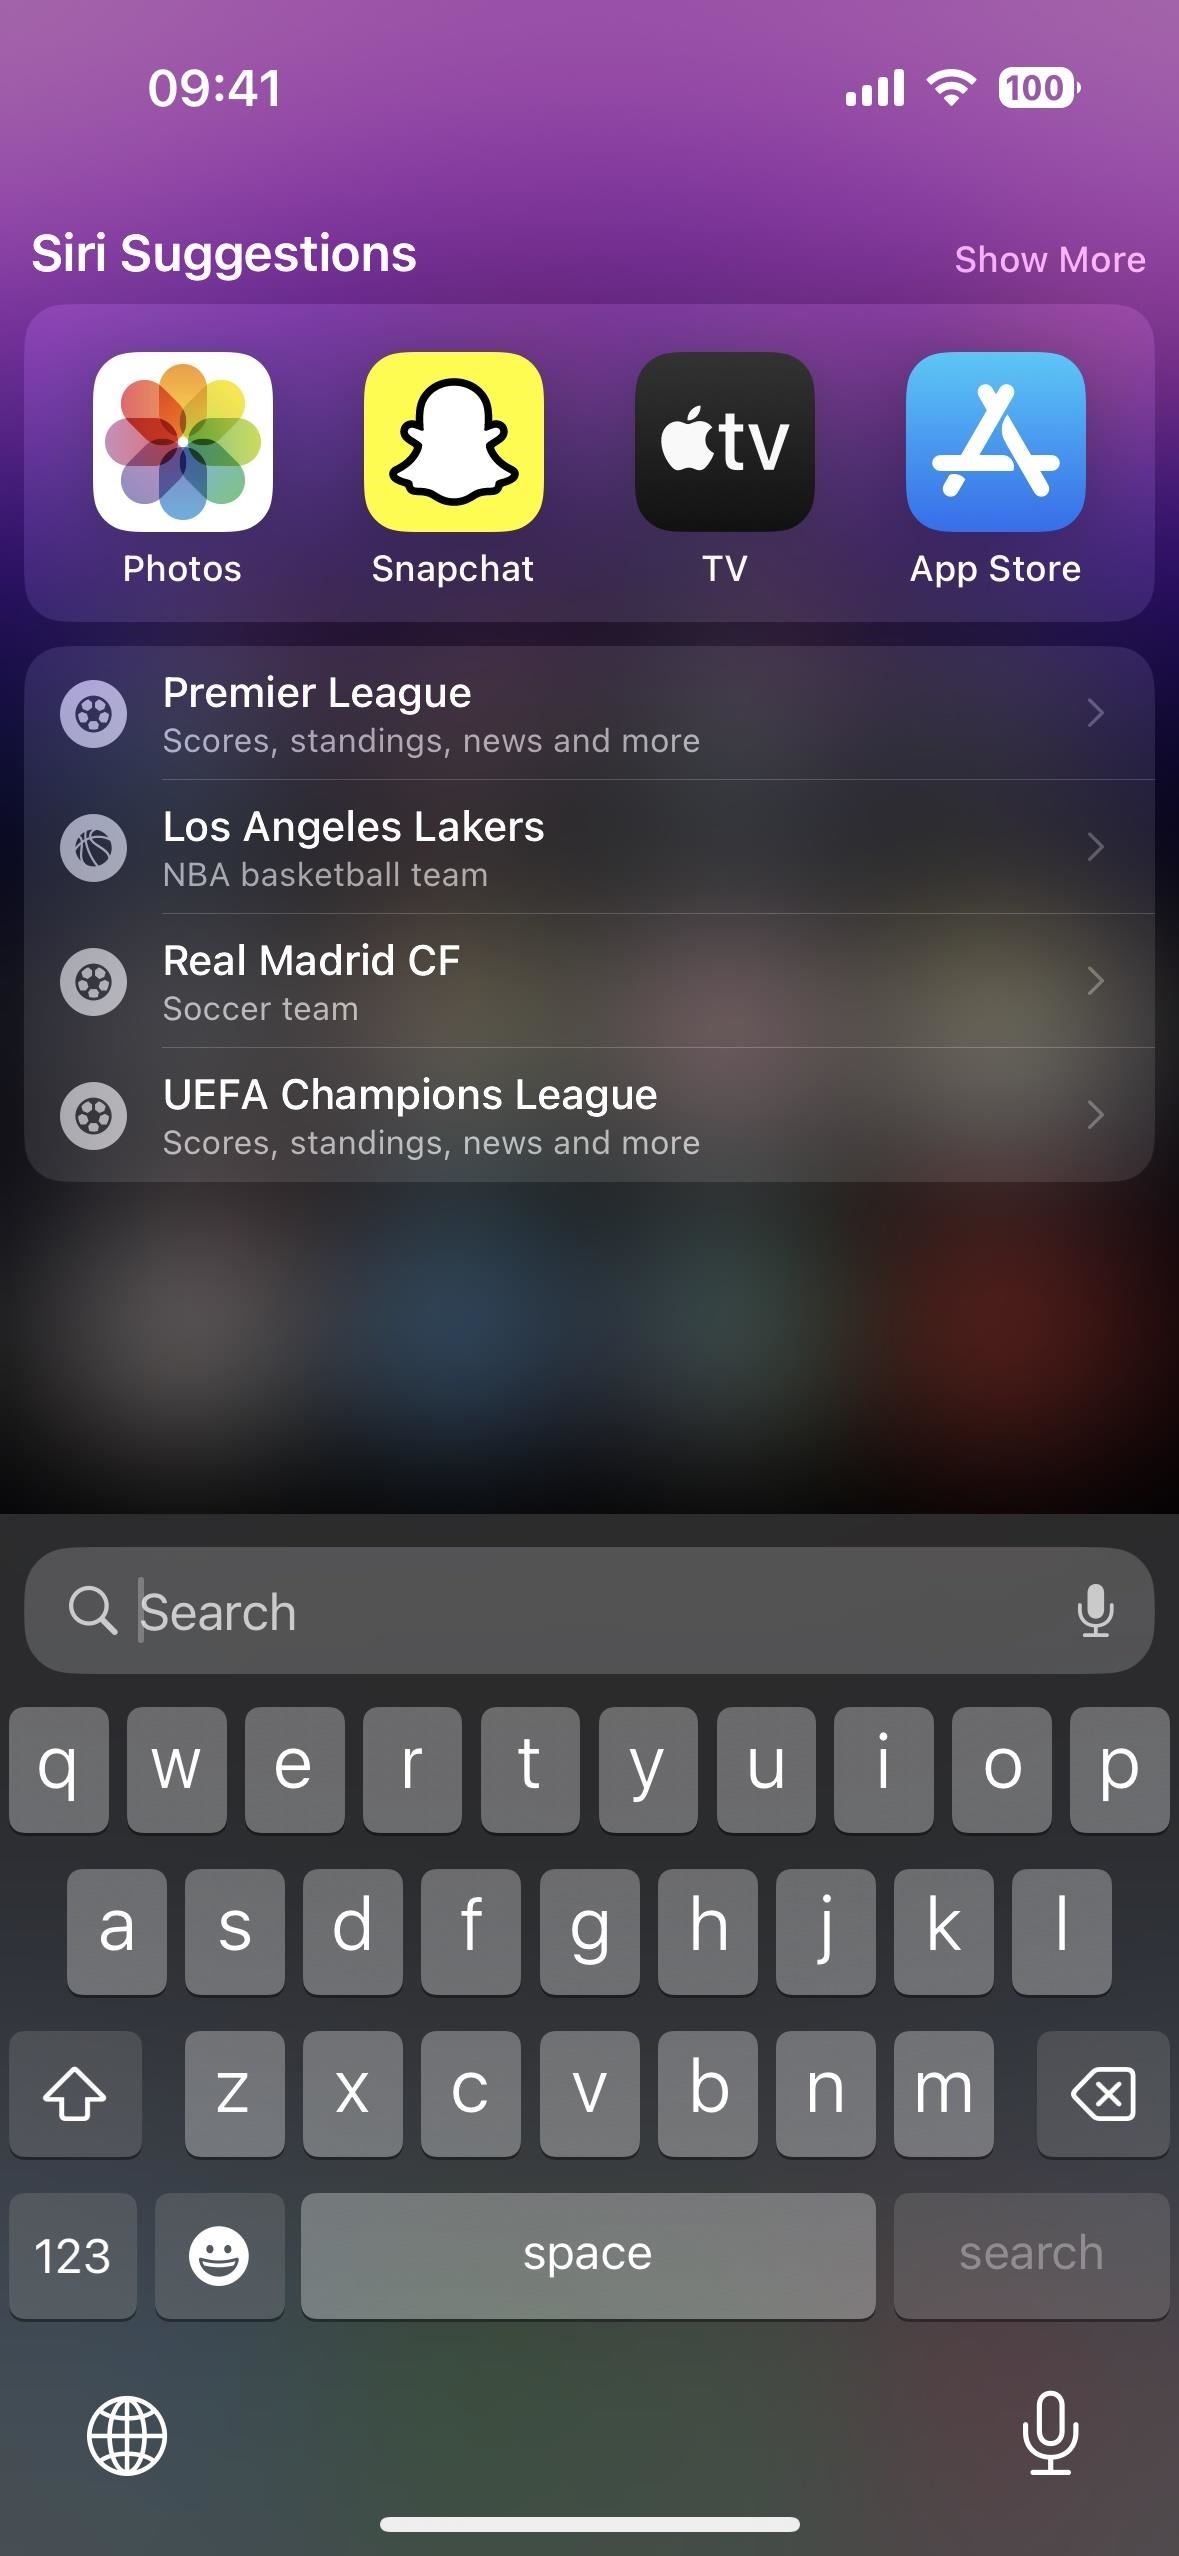 These new updates make Spotlight search even more useful on iPhone